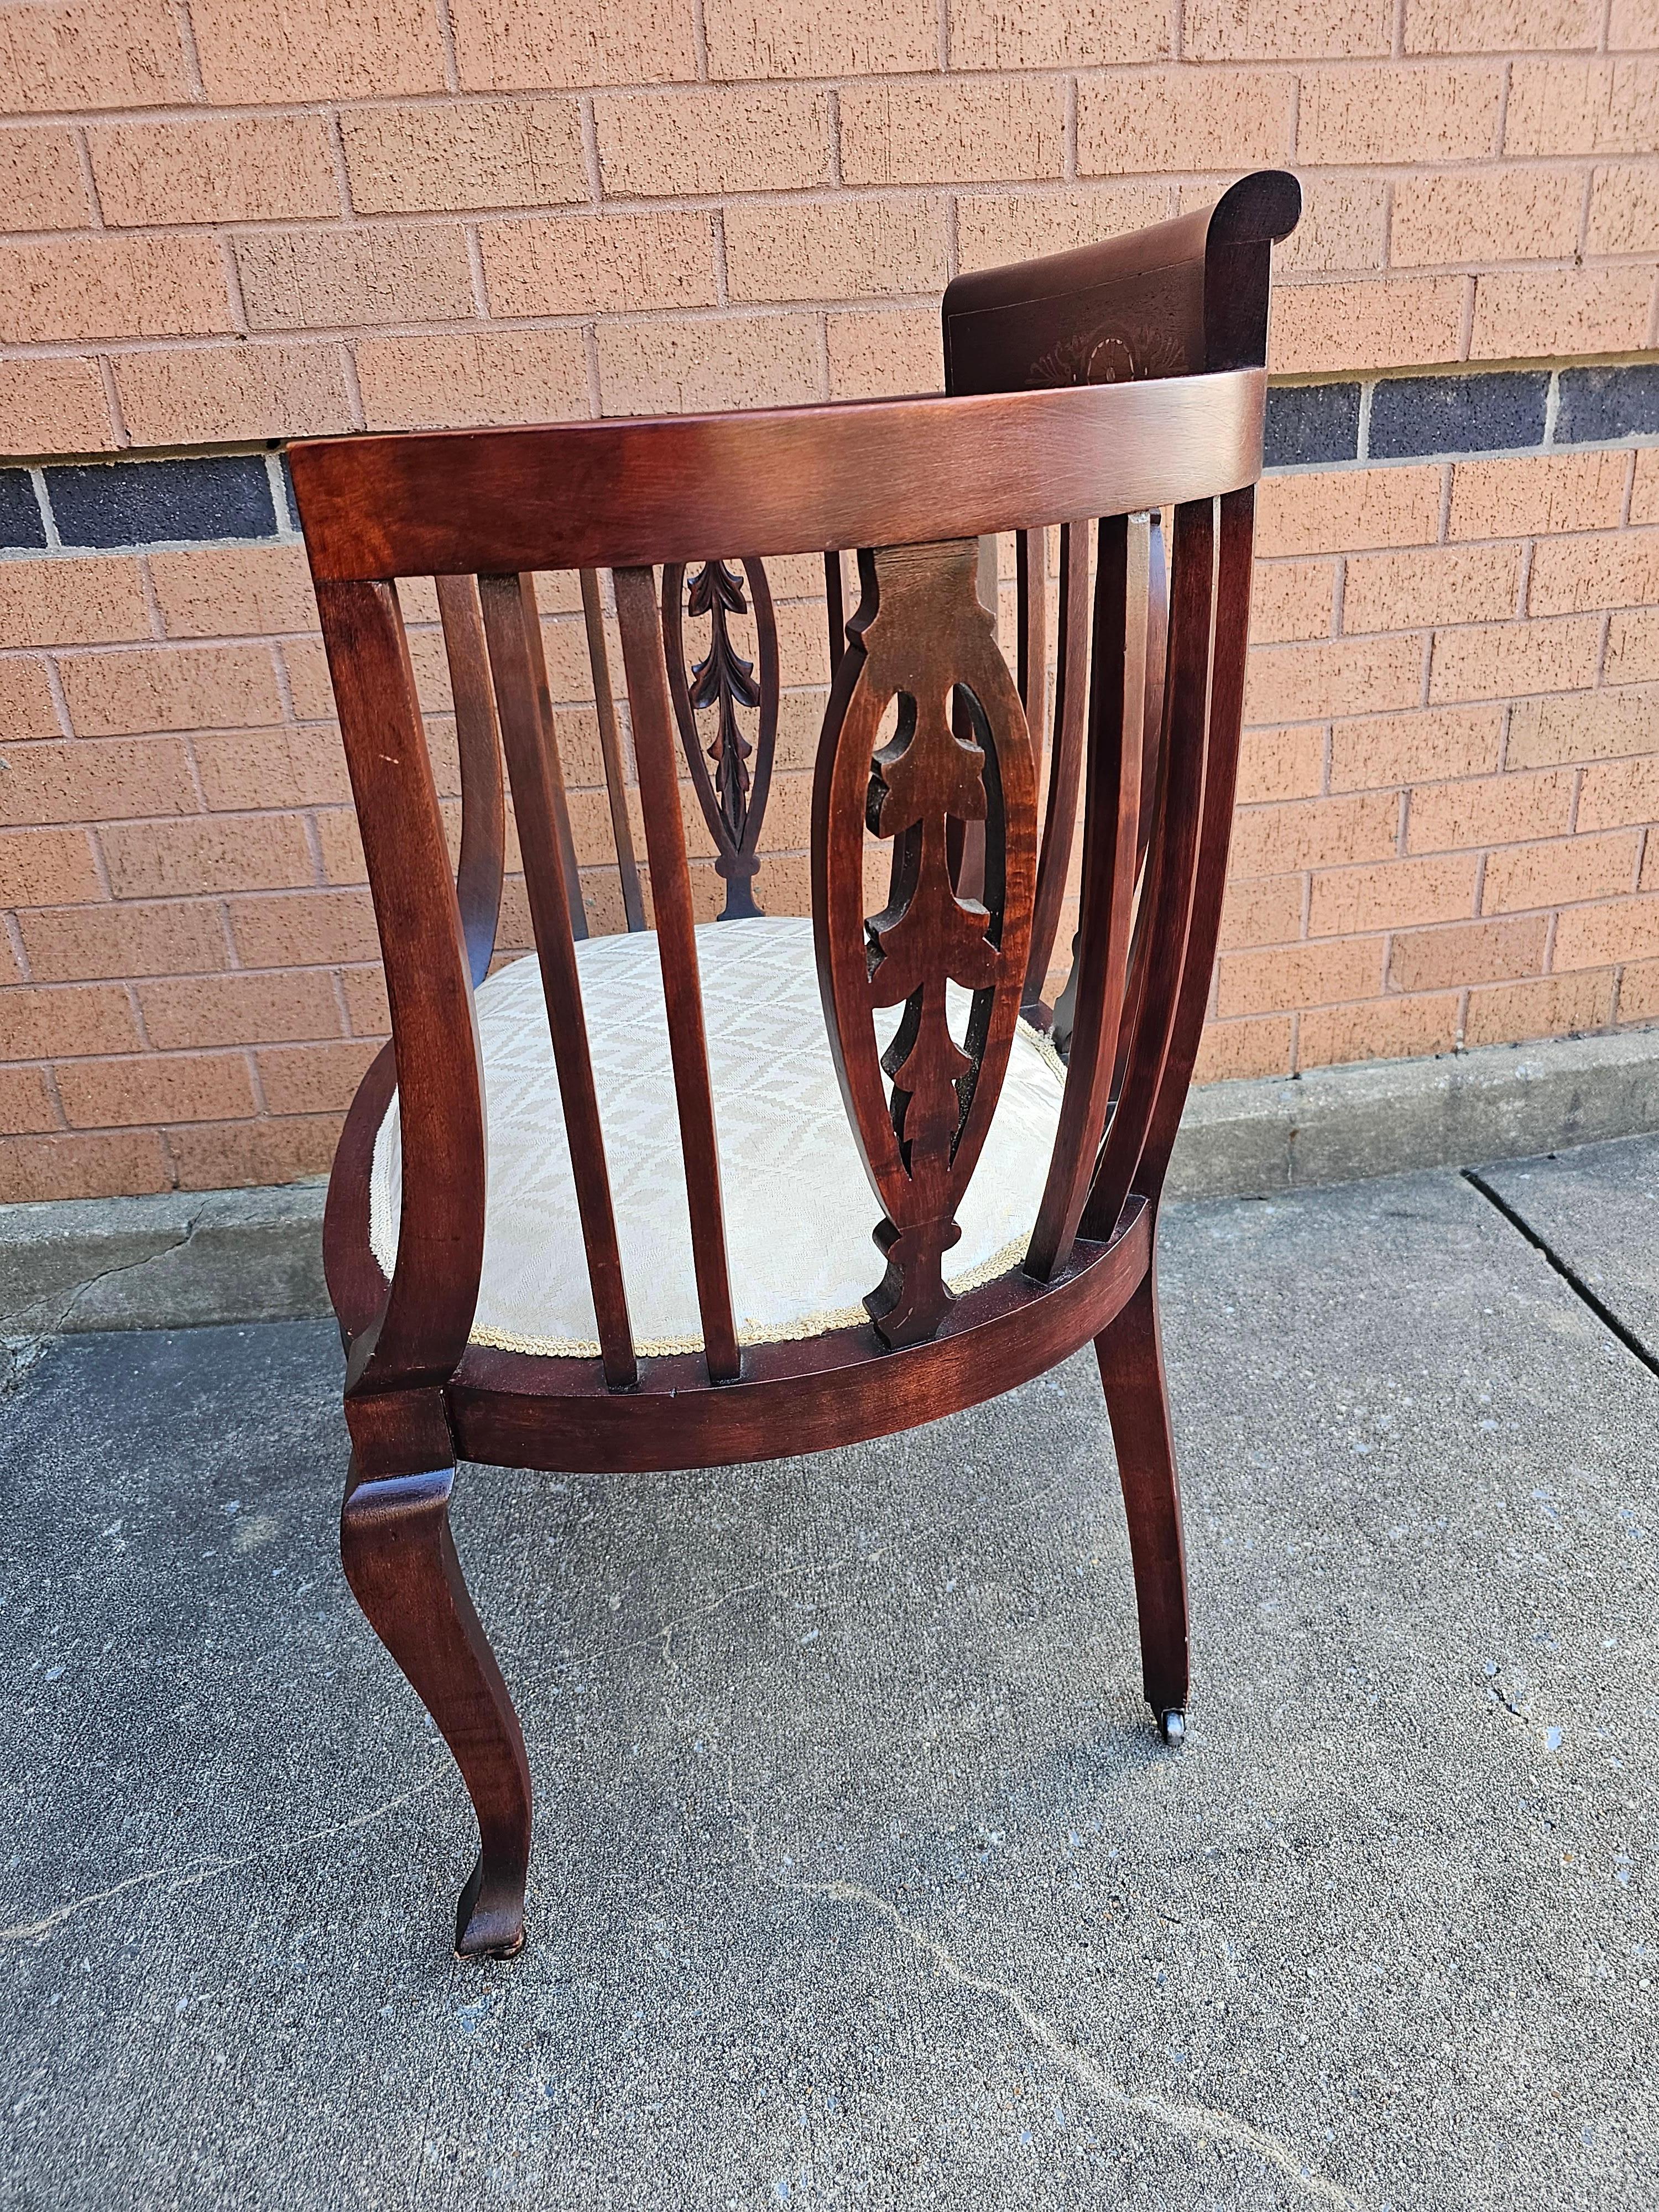 Early 20th Century Edwardian Inlaid Mahogany and Upholstered Seat Barrel Chair In Good Condition For Sale In Germantown, MD